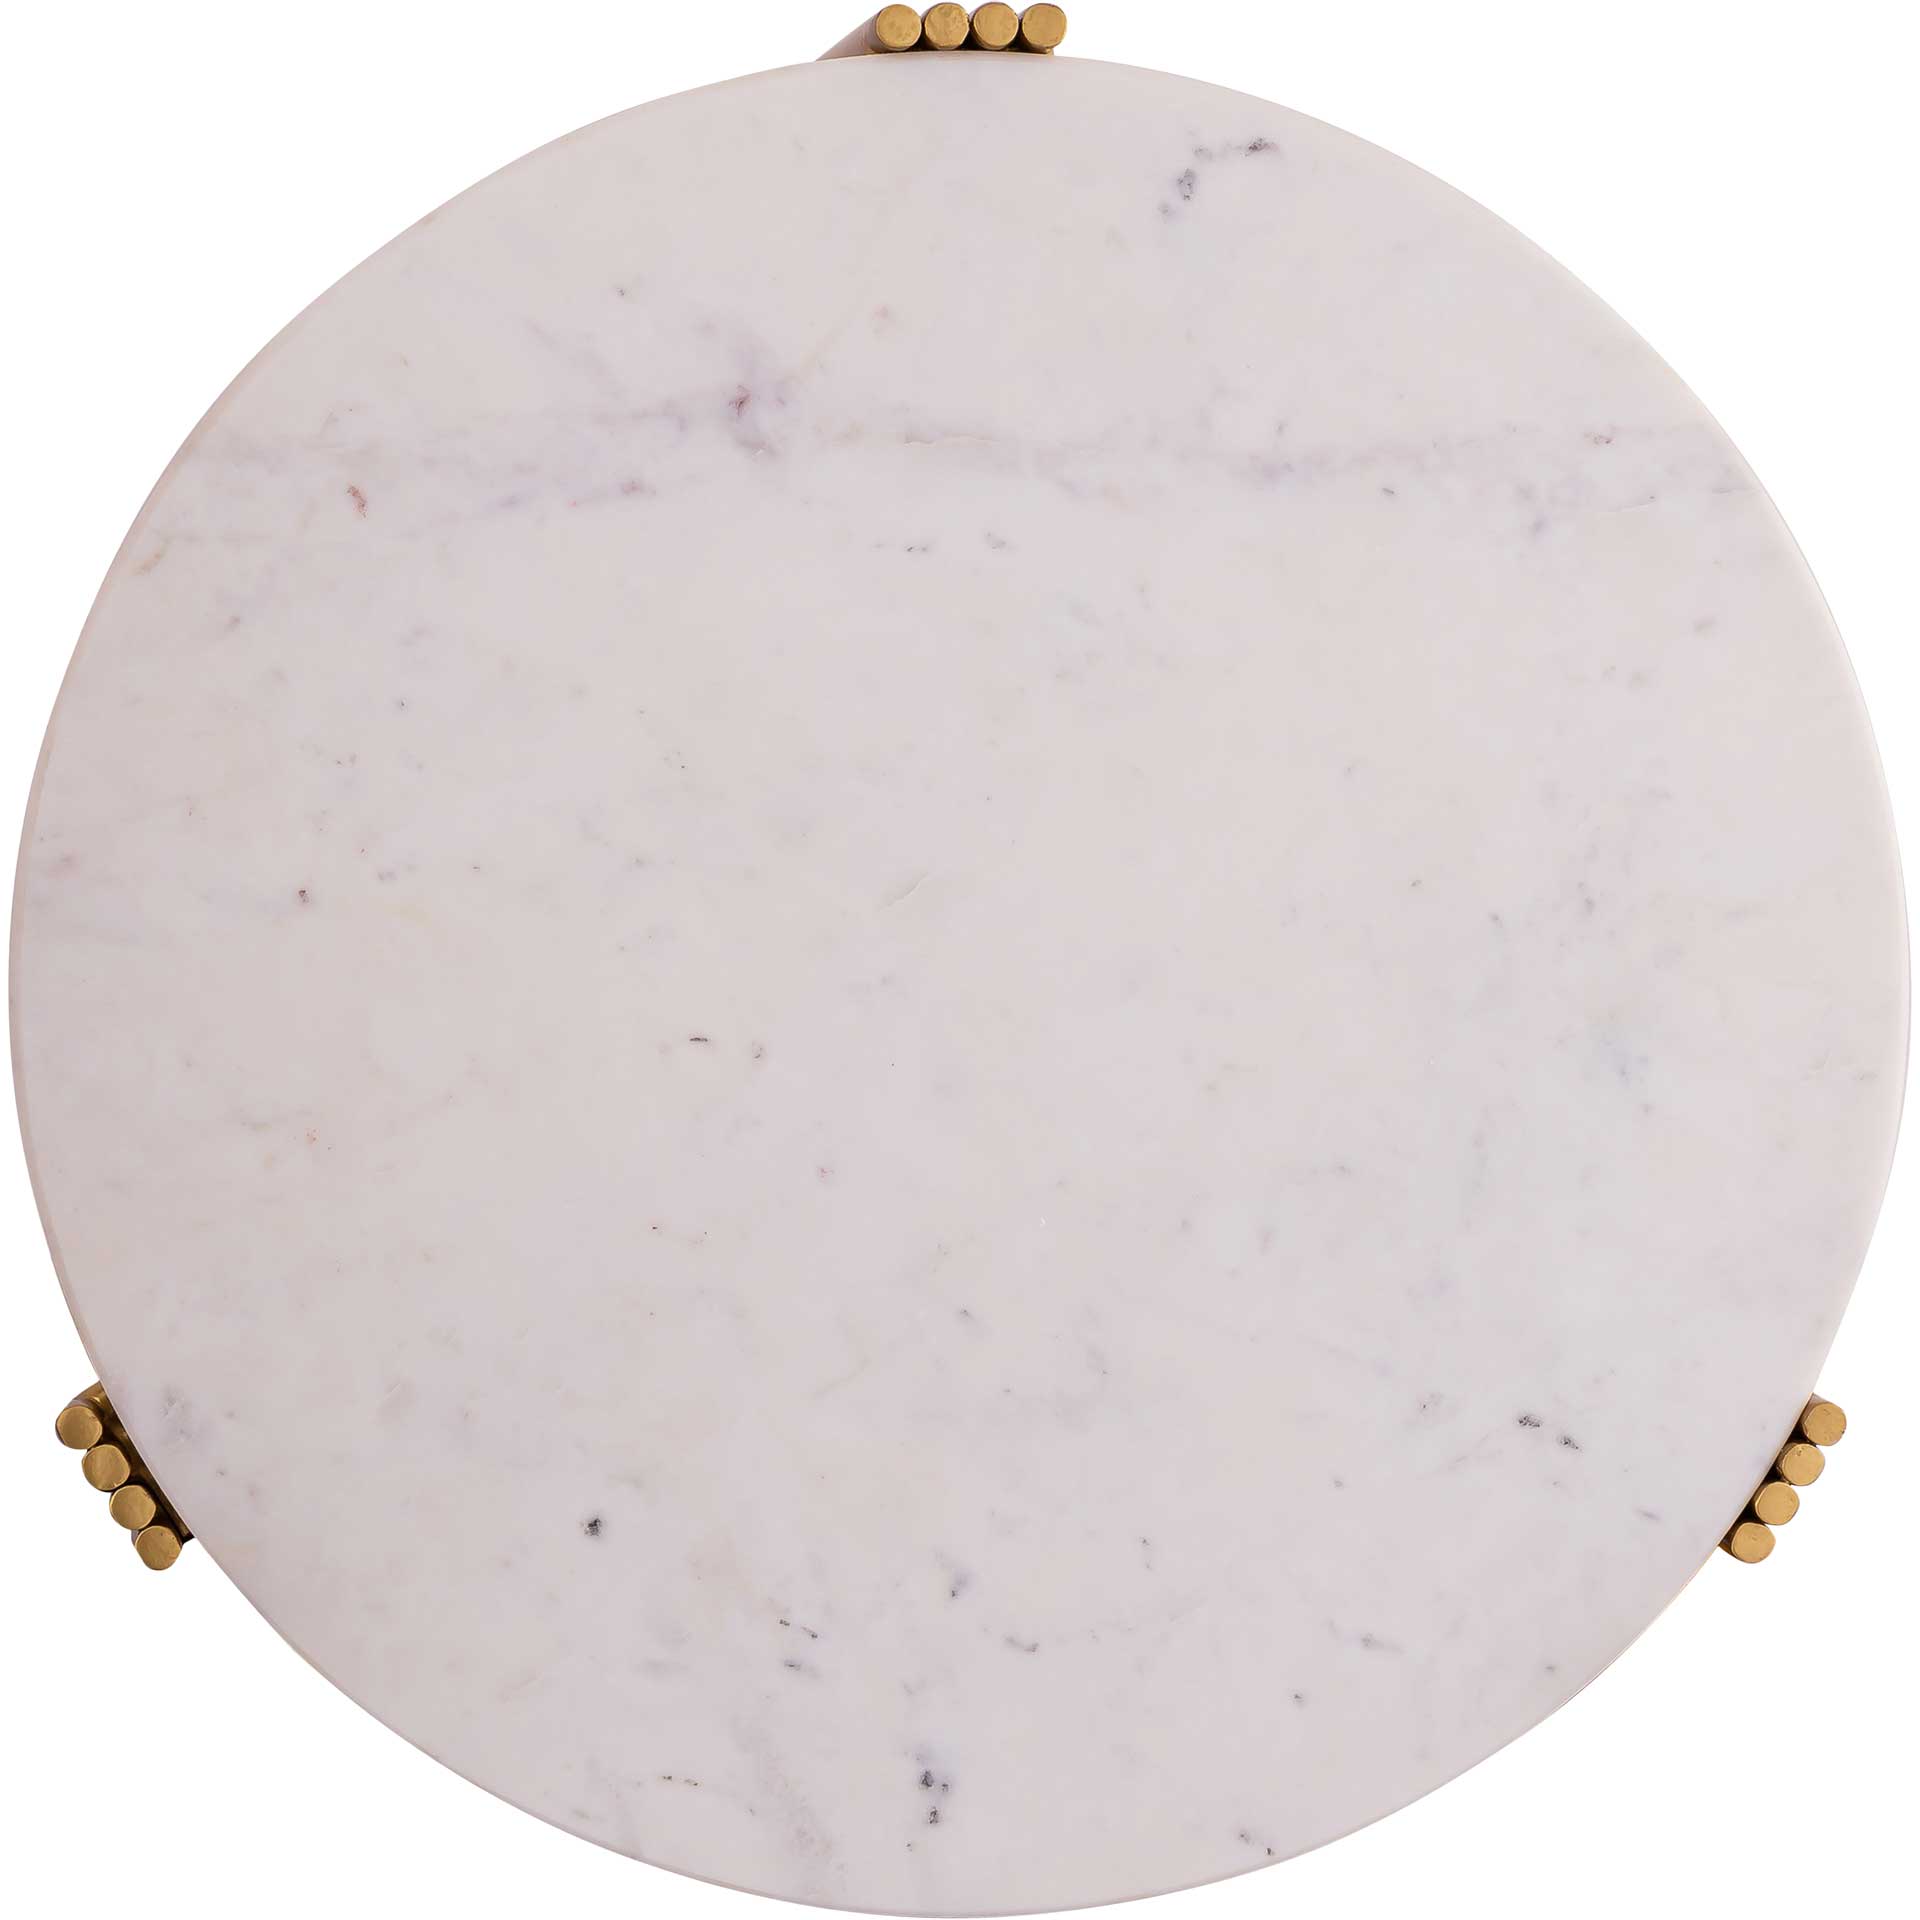 Alayna Marble Side Table Gold/White